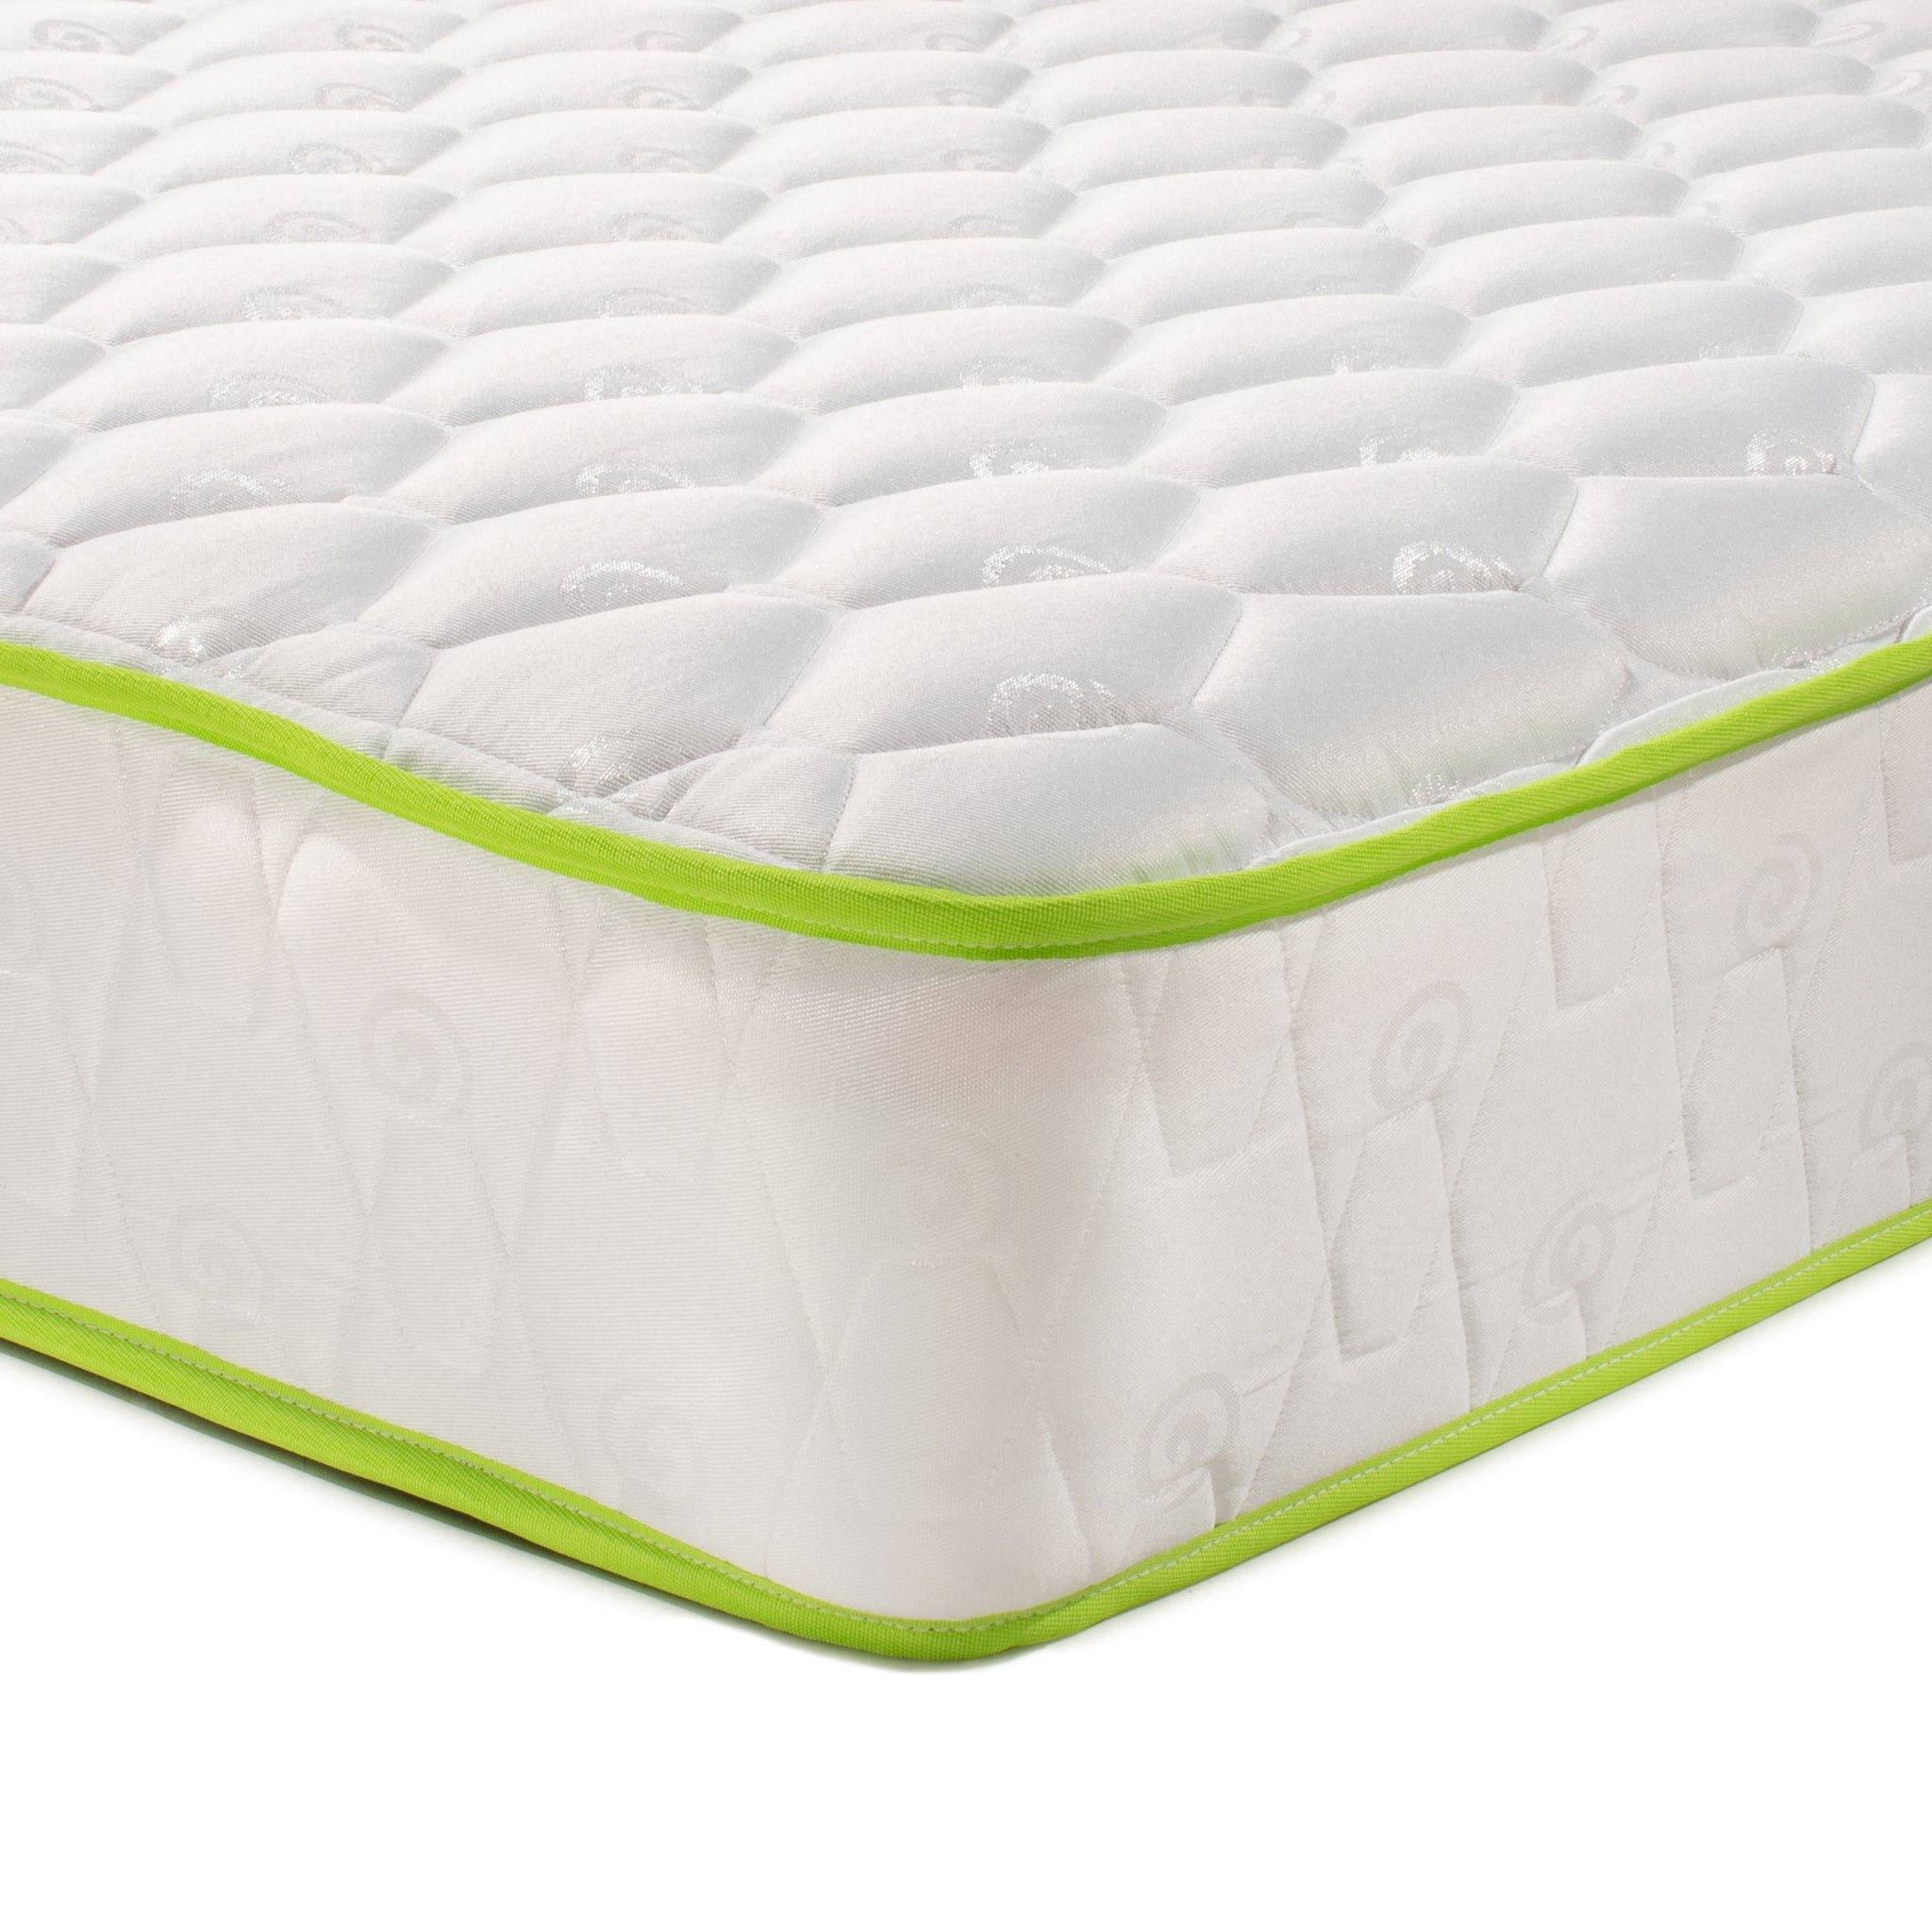 Back Rest Queen Size Innerspring Mattress - Australian Made - 3 Year Warranty - Free Delivery - Melbourne Mattress Factory